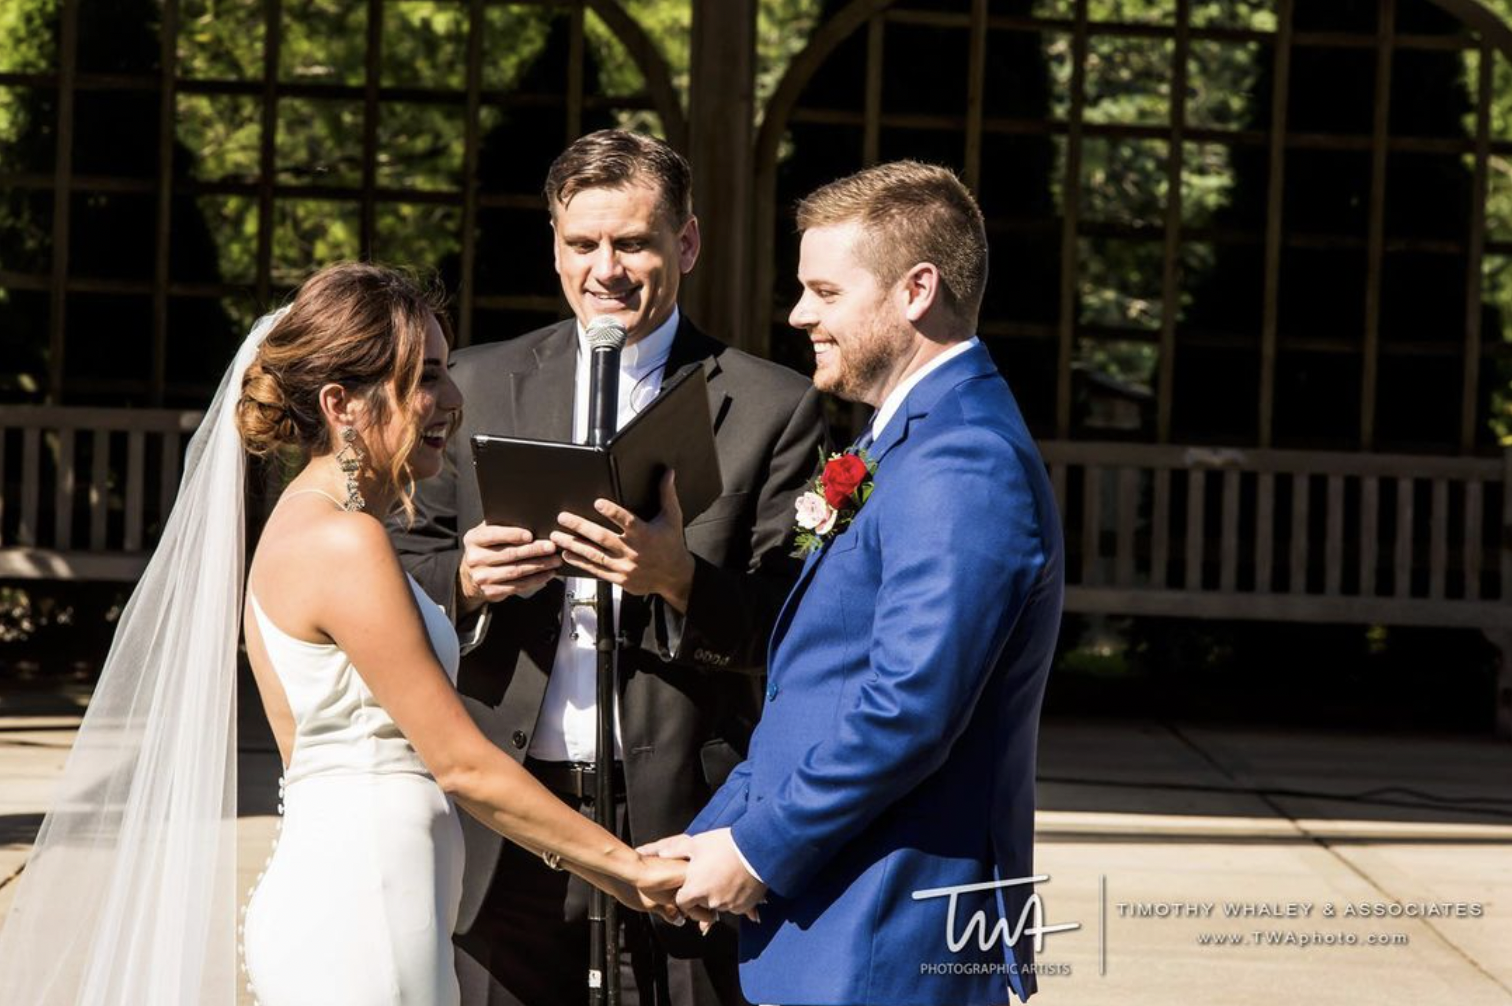 Bride and groom take their wedding vows